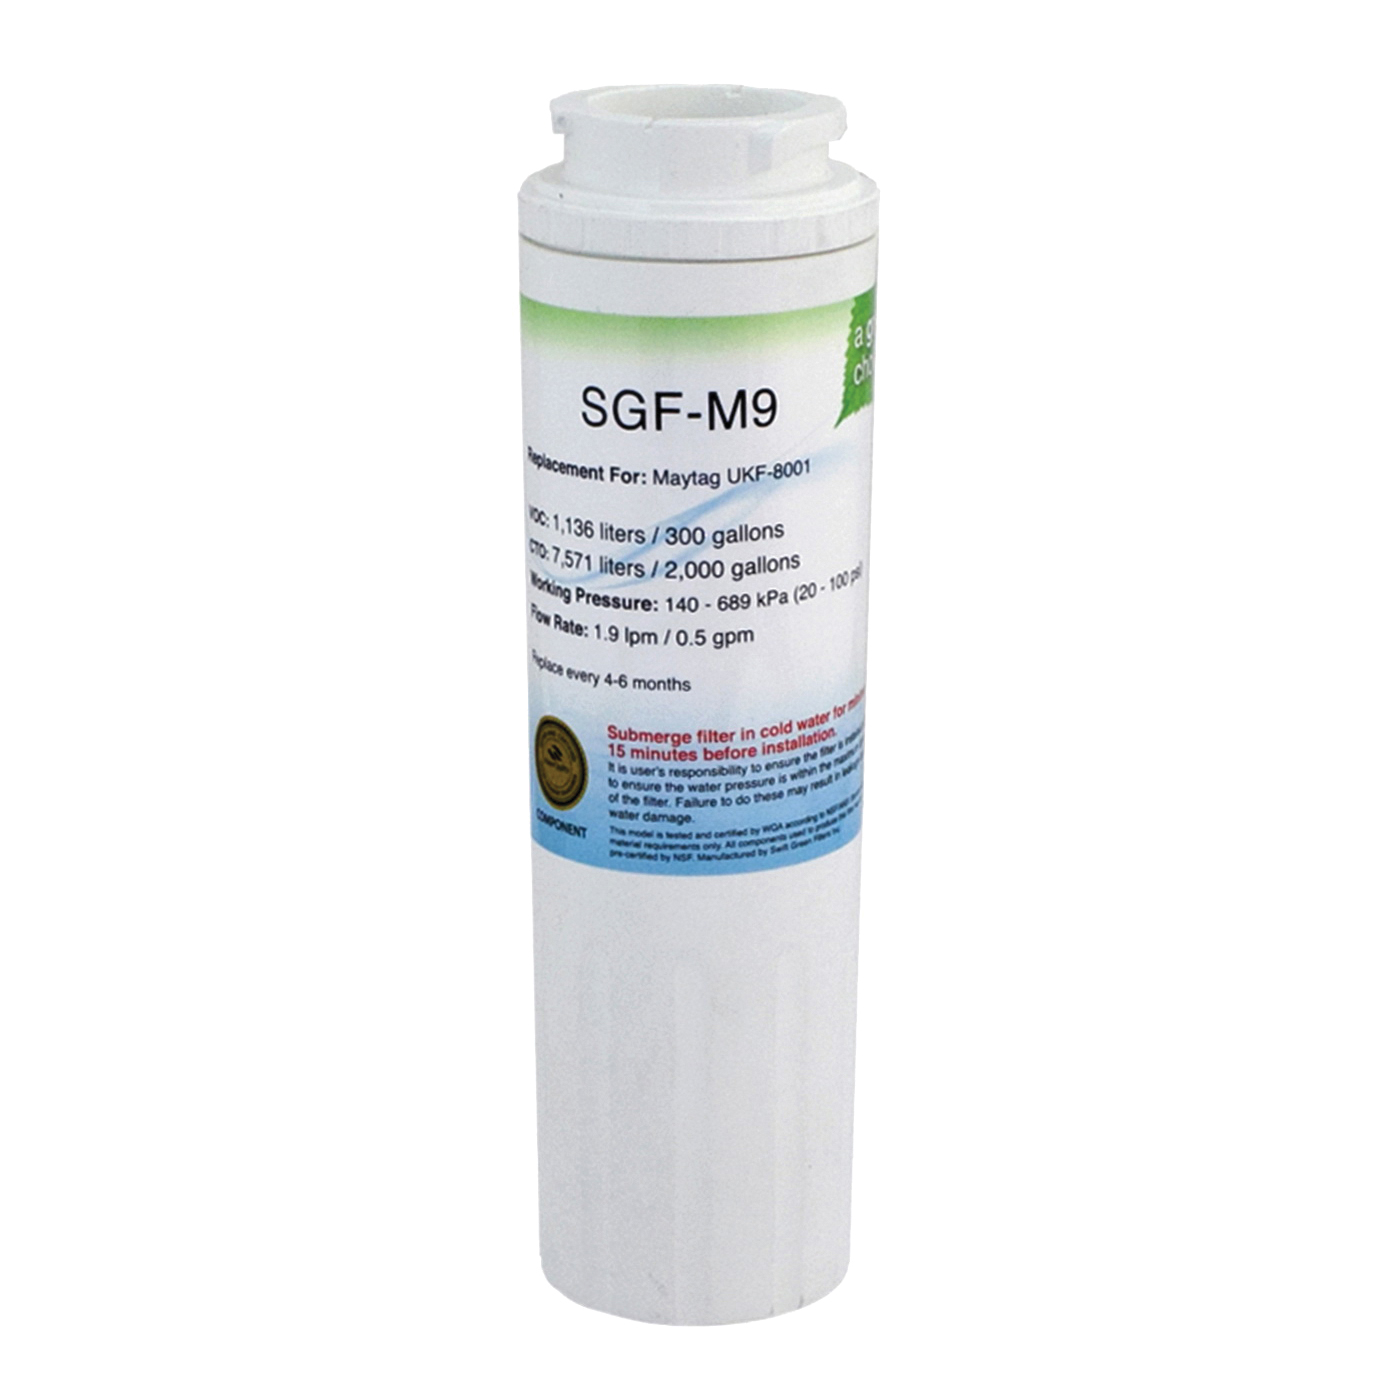 Swift Green Filters SGF-M9 Refrigerator Water Filter, 0.5 gpm, Coconut Shell Carbon Block Filter Media - 3